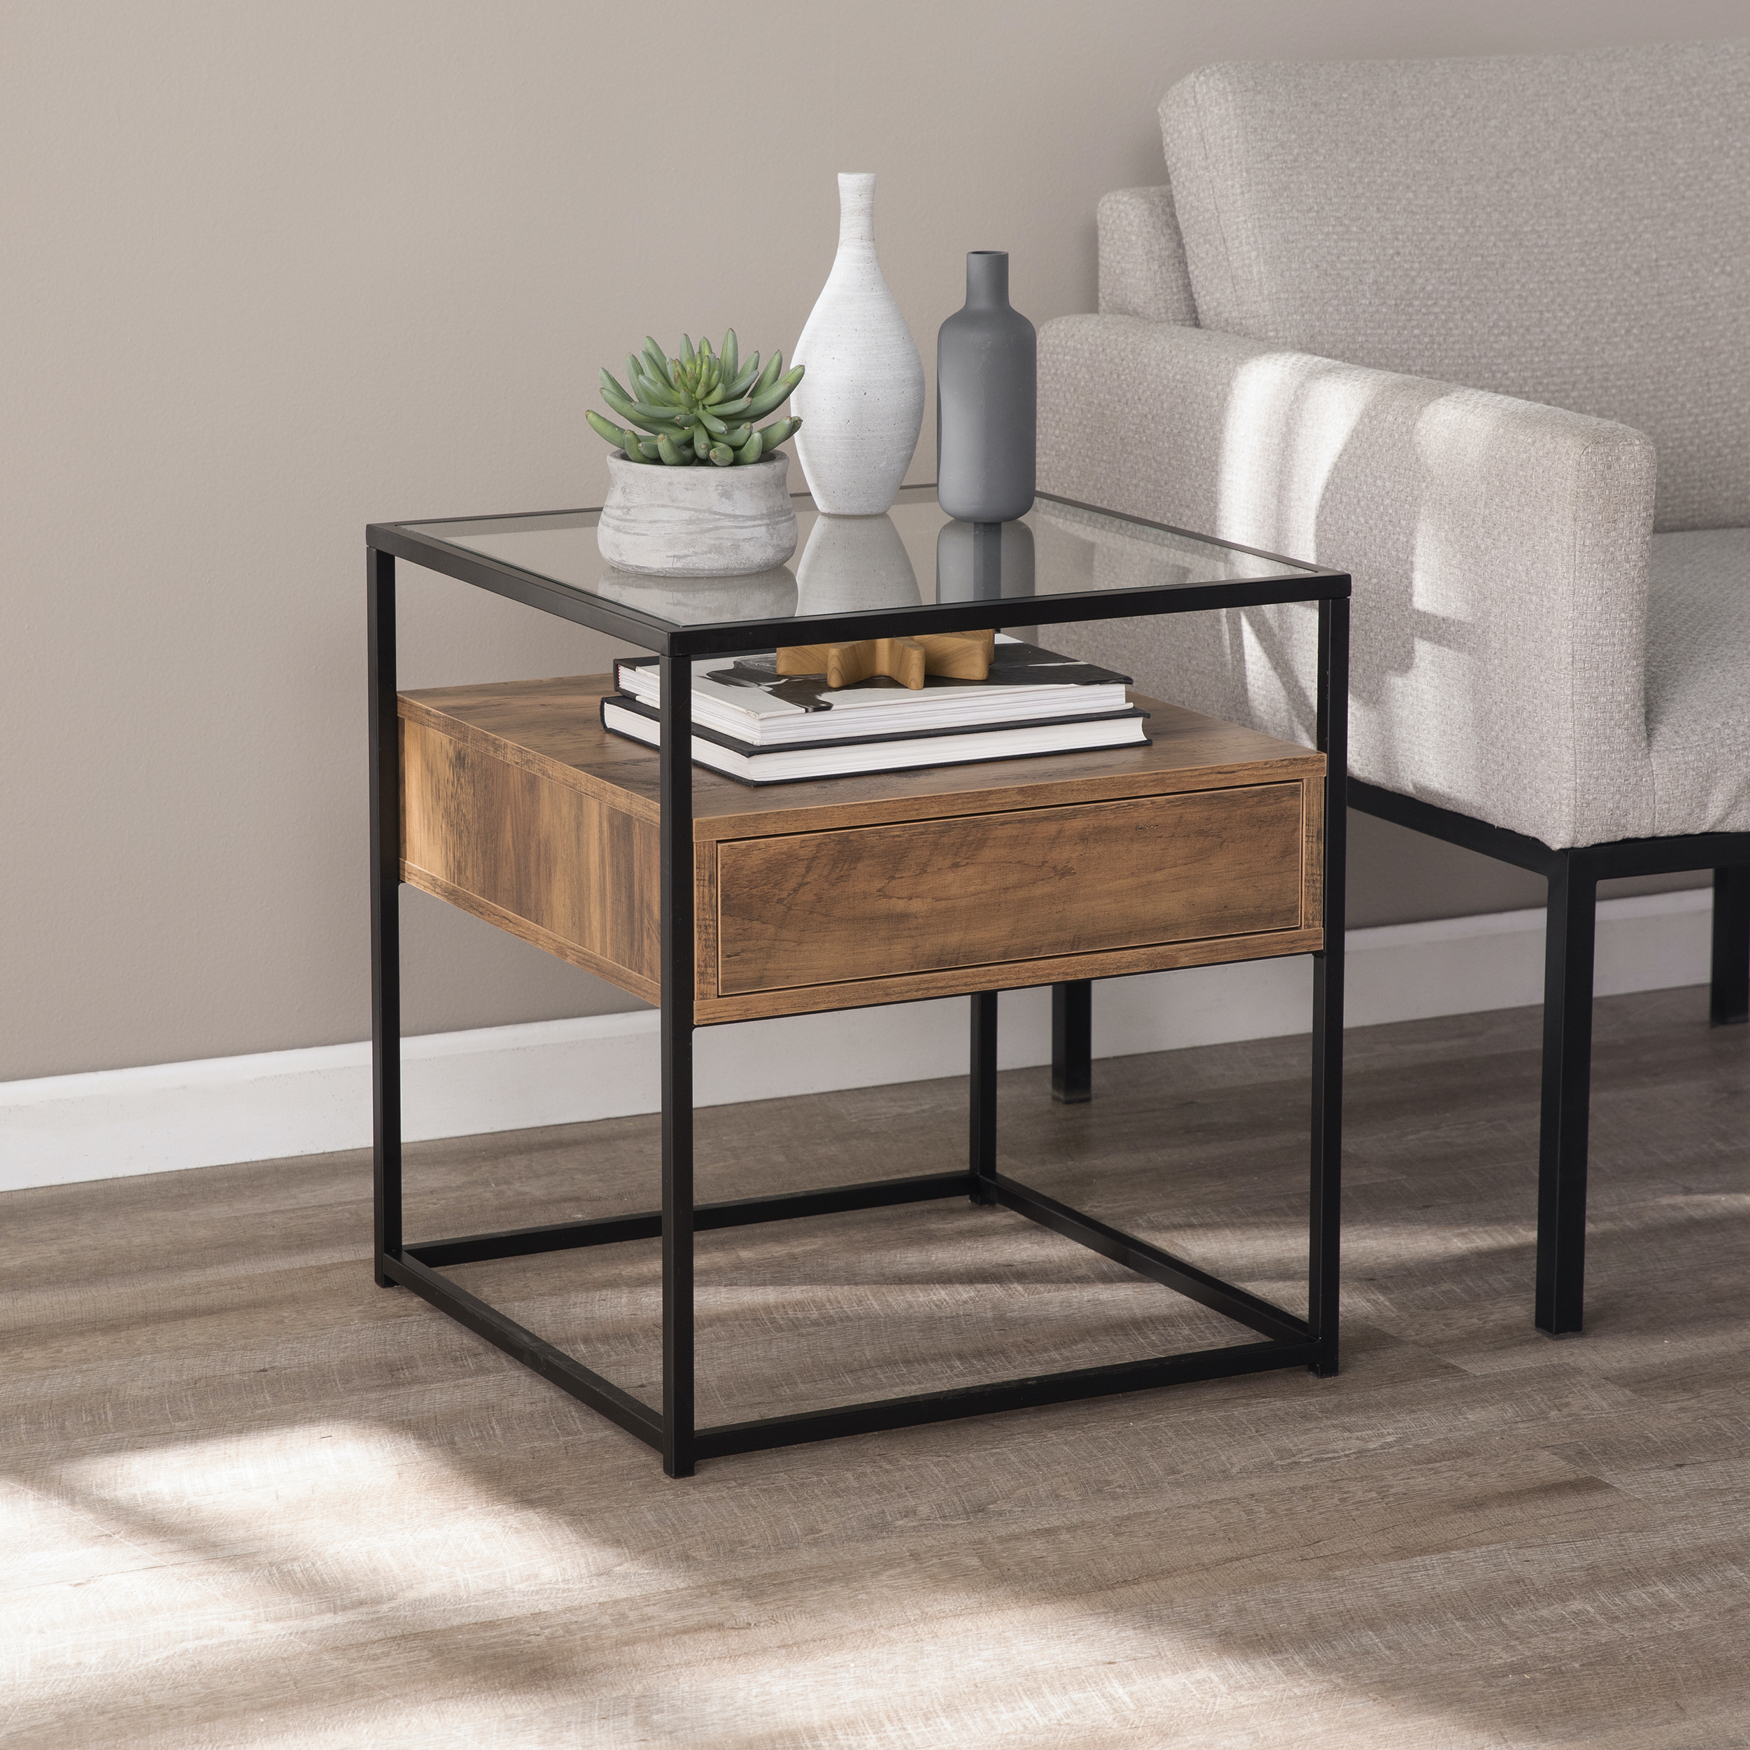 Olivern Glass-Top End Table w/ Storage, BROWN